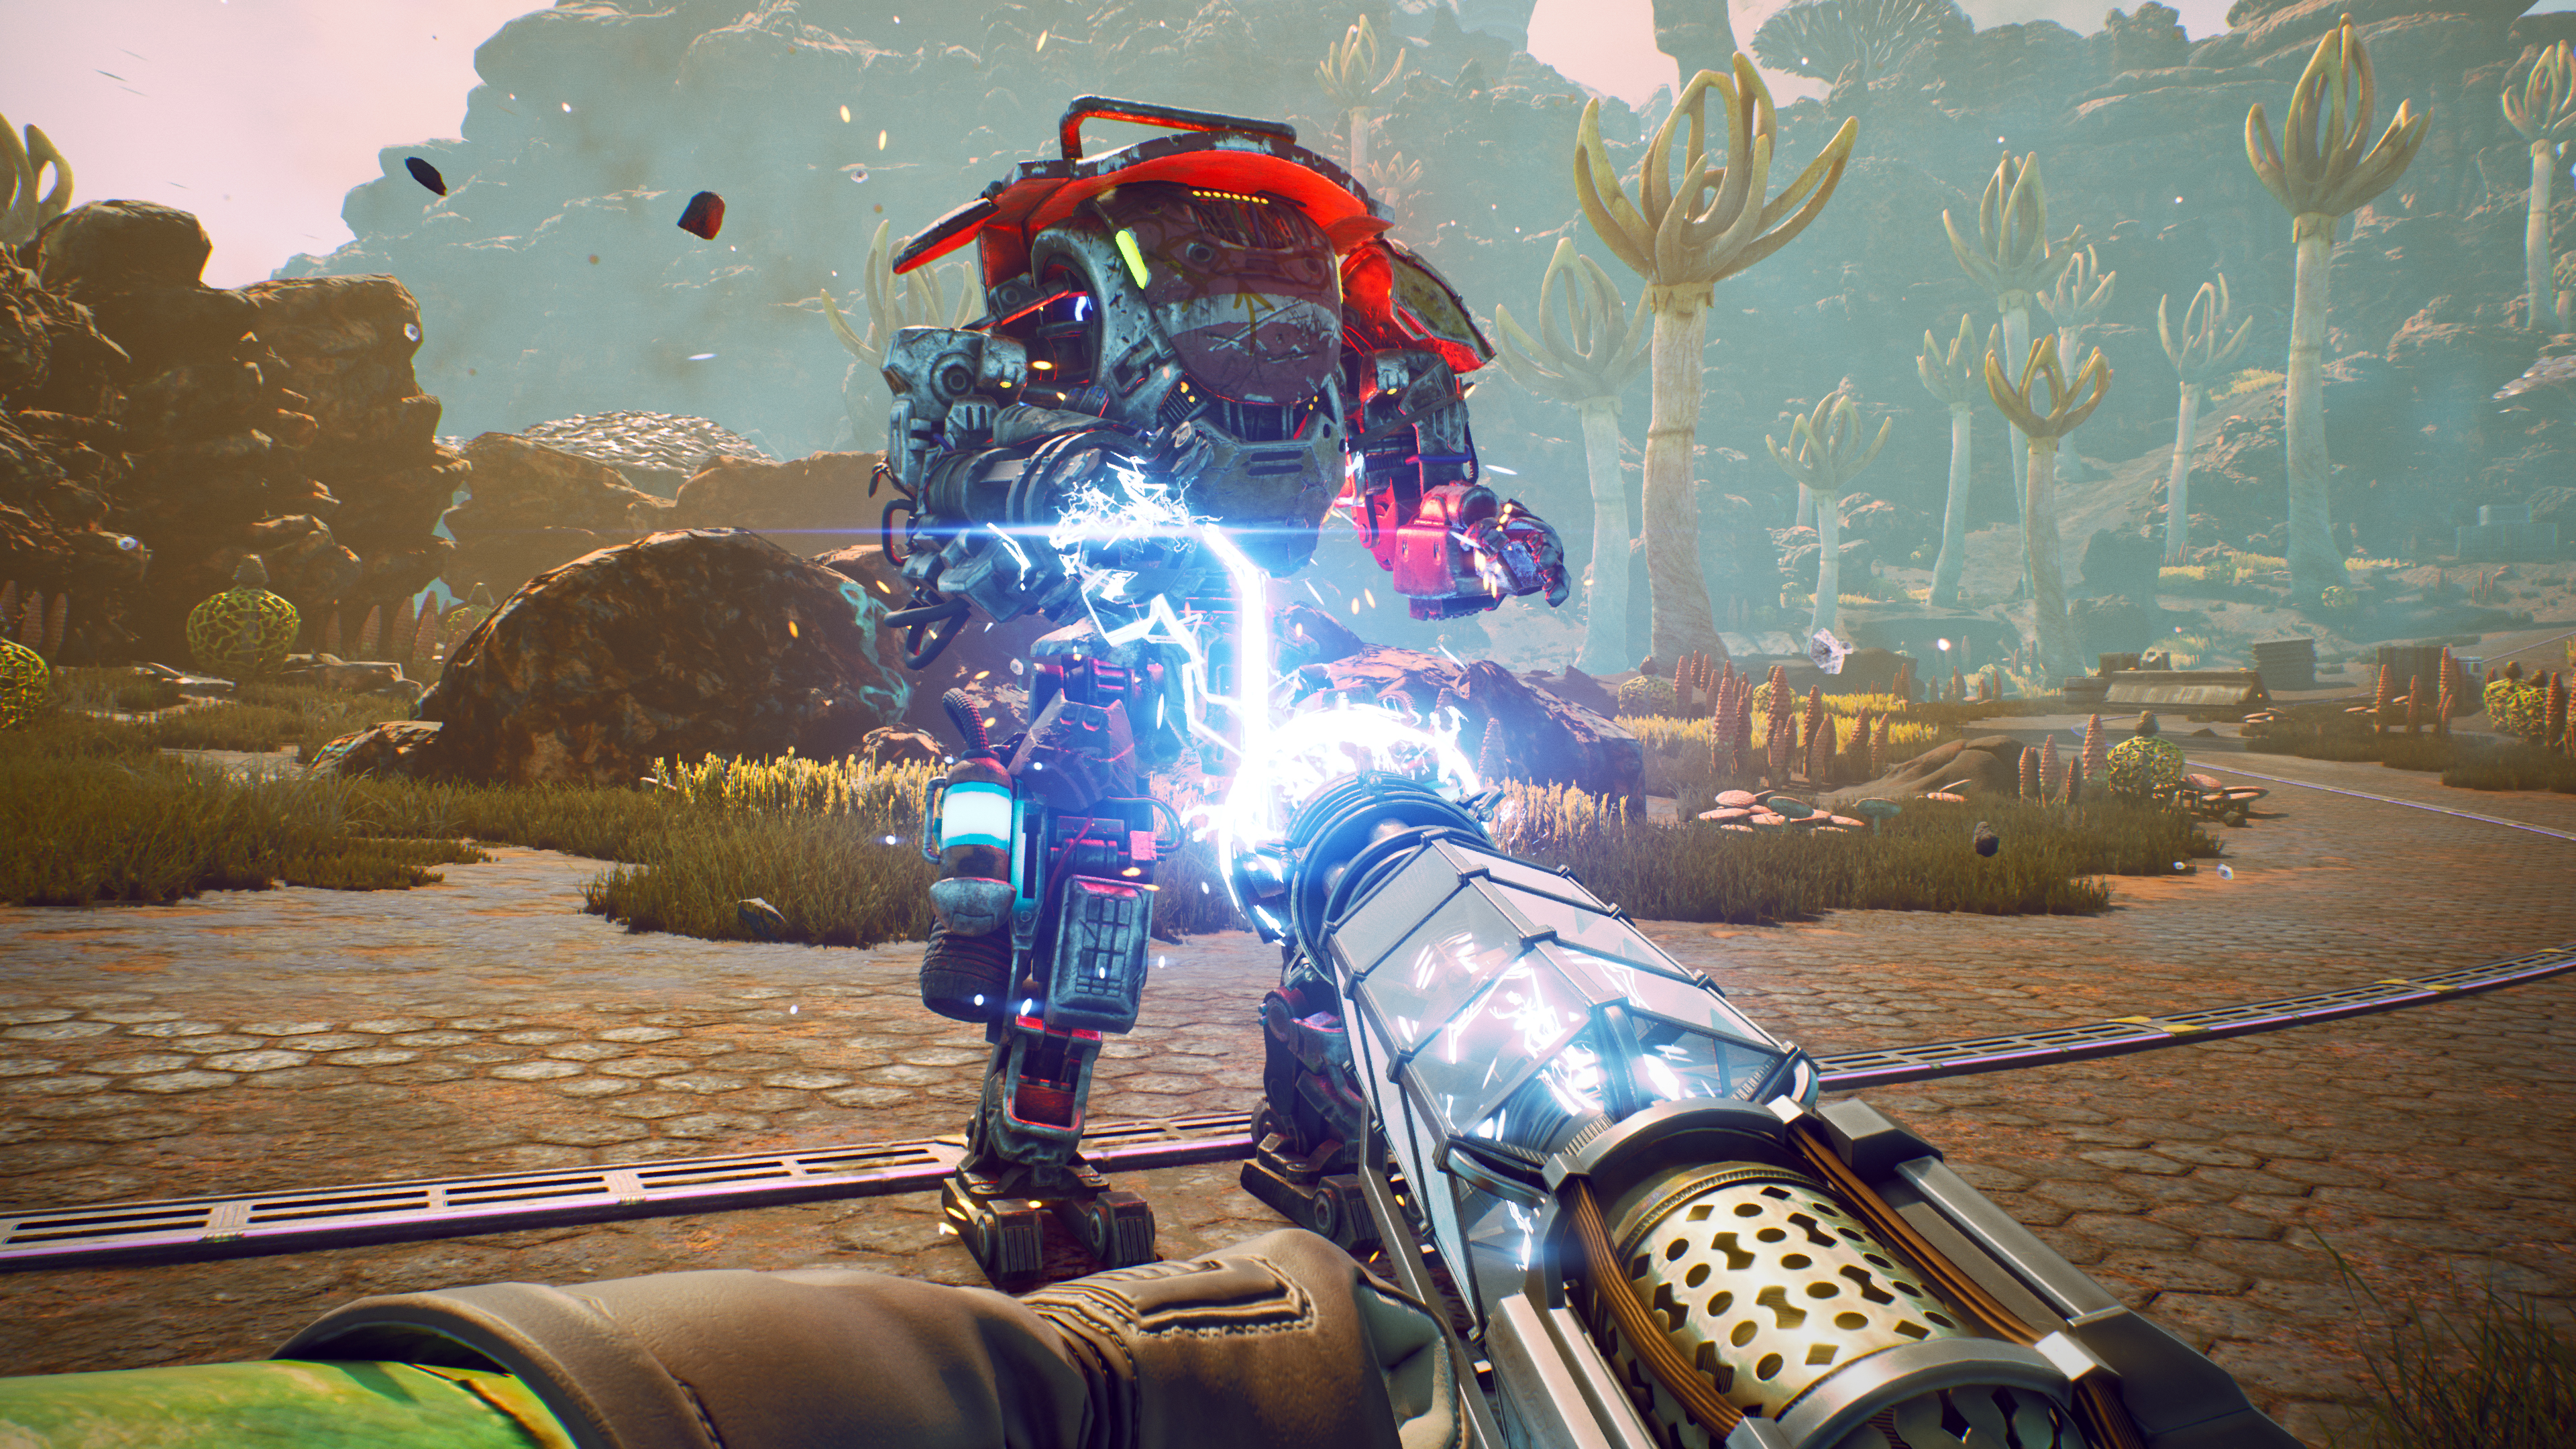 The Outer Worlds - 19 Minutes of New Gameplay Footage - News -  Gamesplanet.com